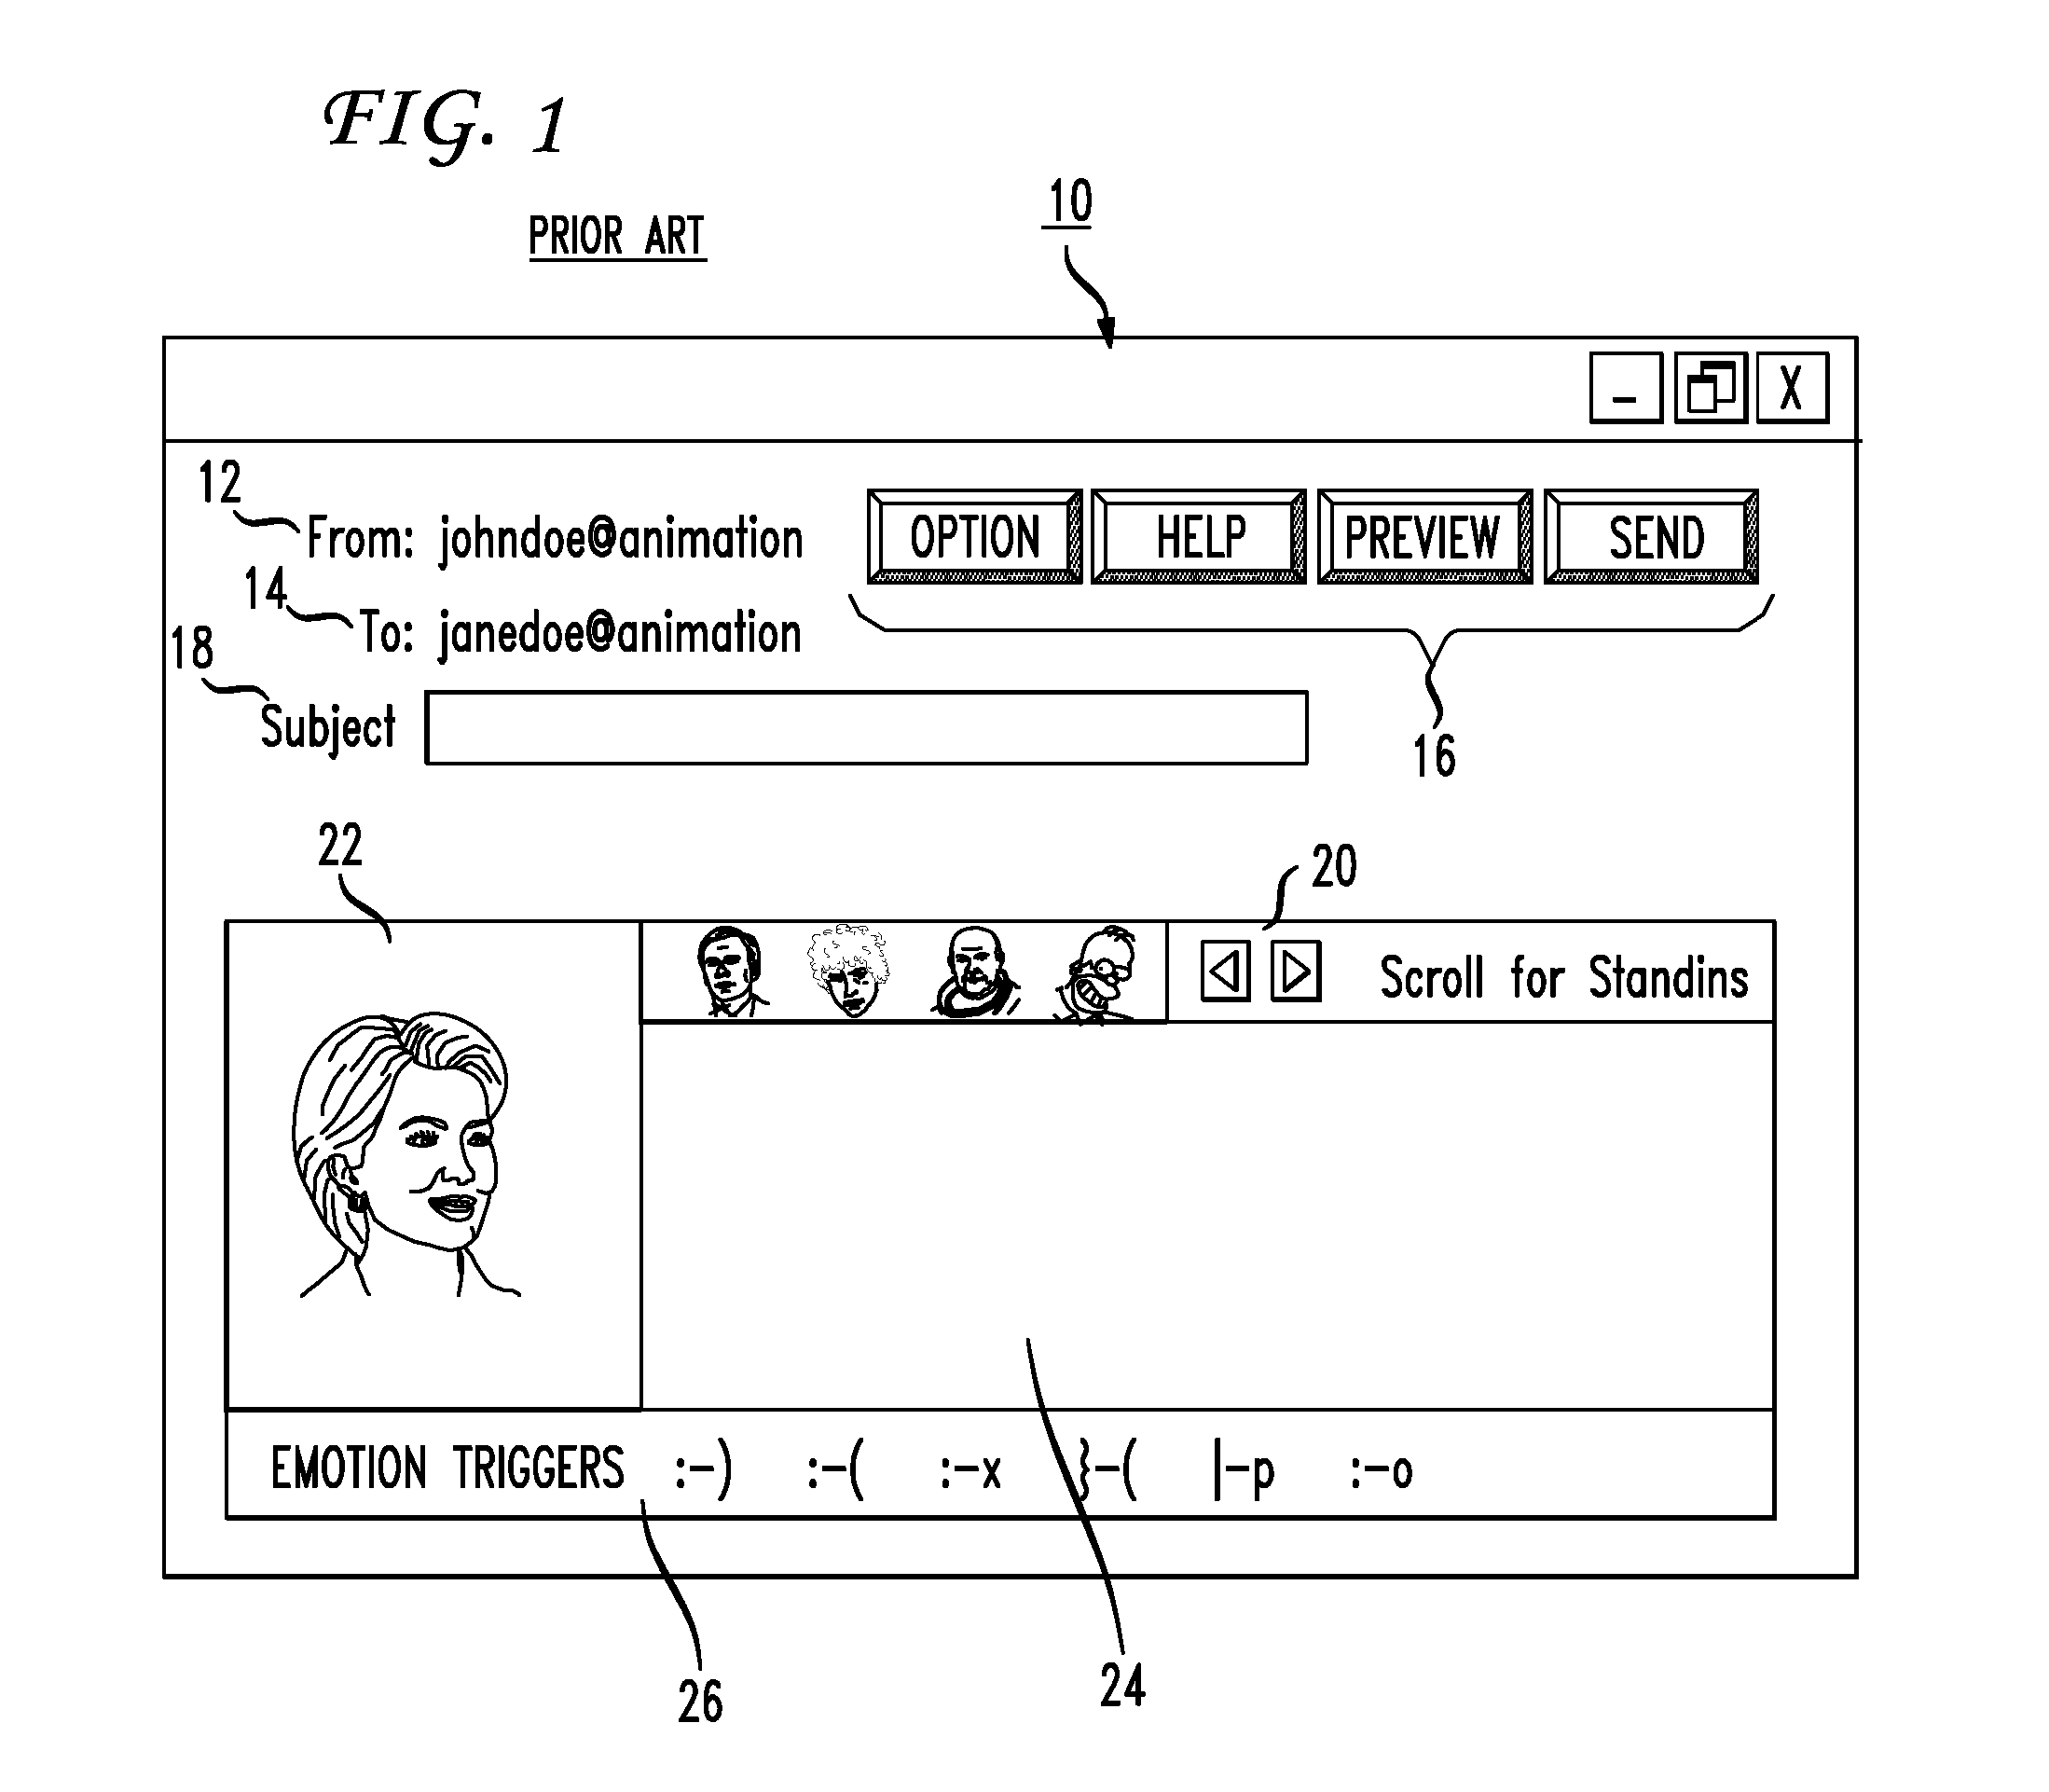 System and method of marketing using a multi-media communication system